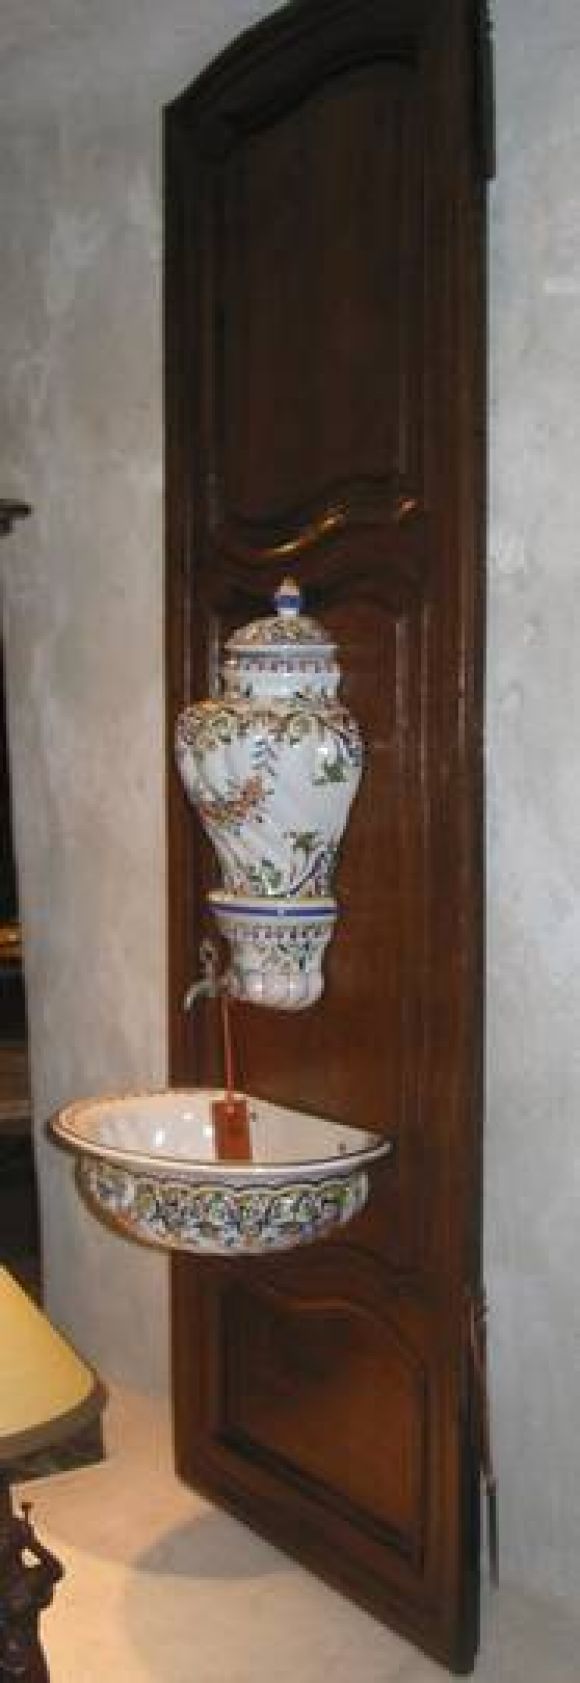 Turn of the 19th century French Faience Lavabo top portion 19